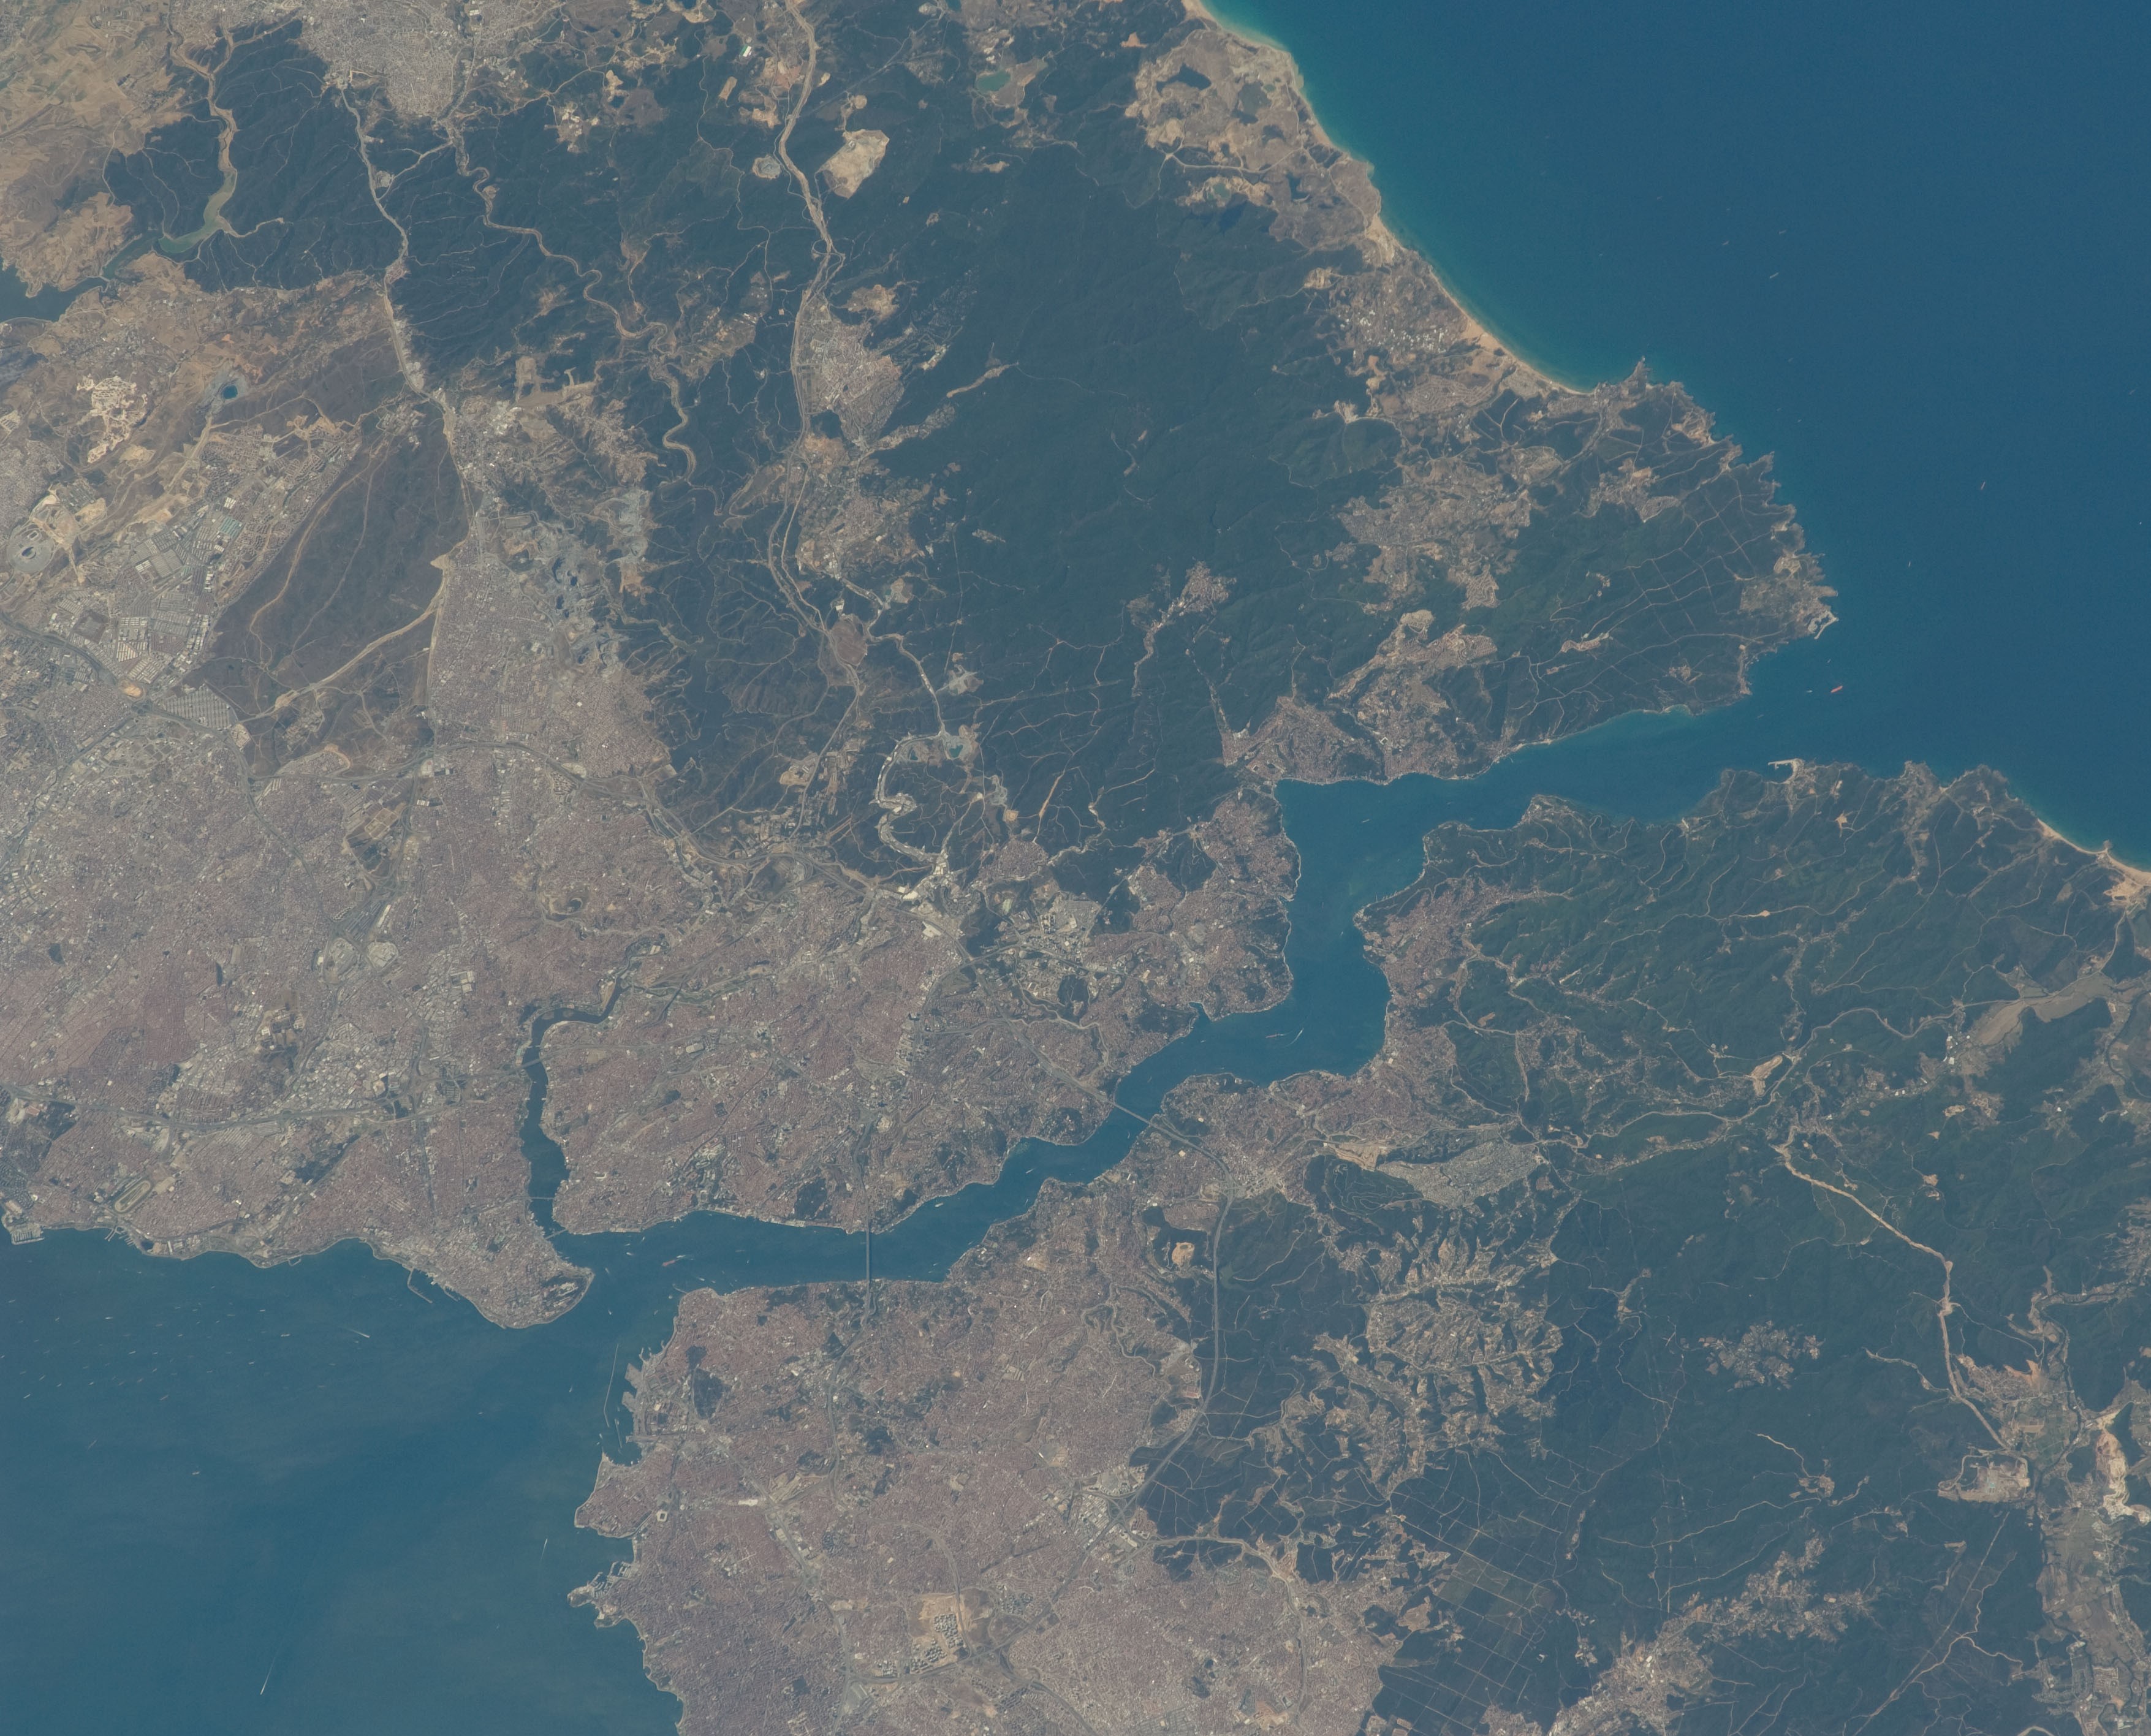 Istanbul straddling Europe, left, and Asia